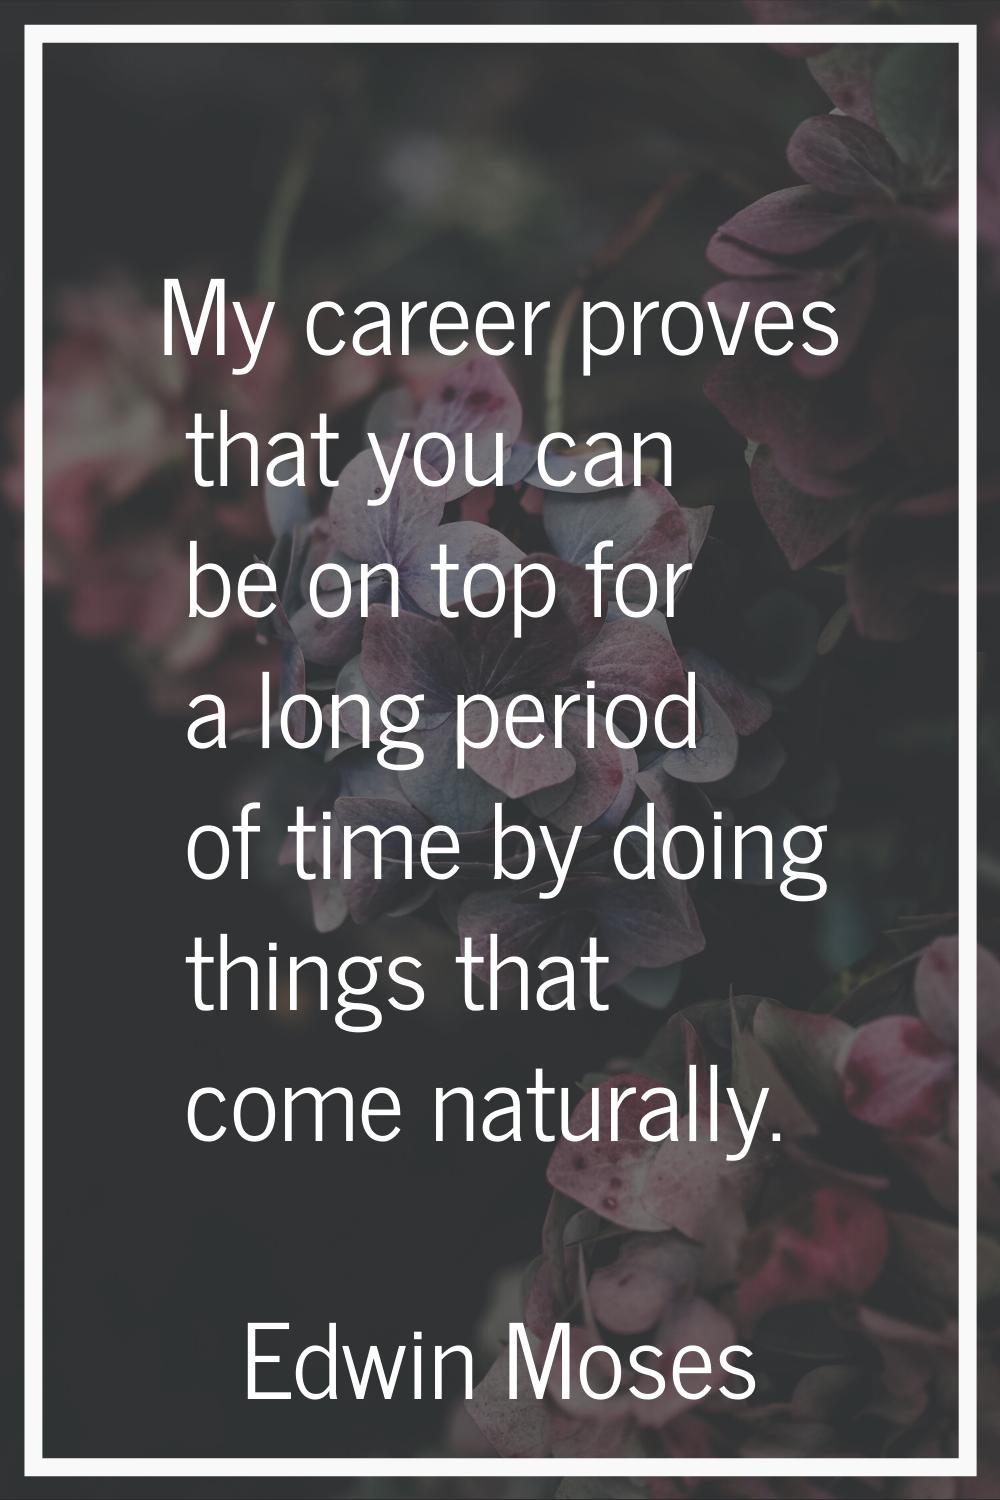 My career proves that you can be on top for a long period of time by doing things that come natural